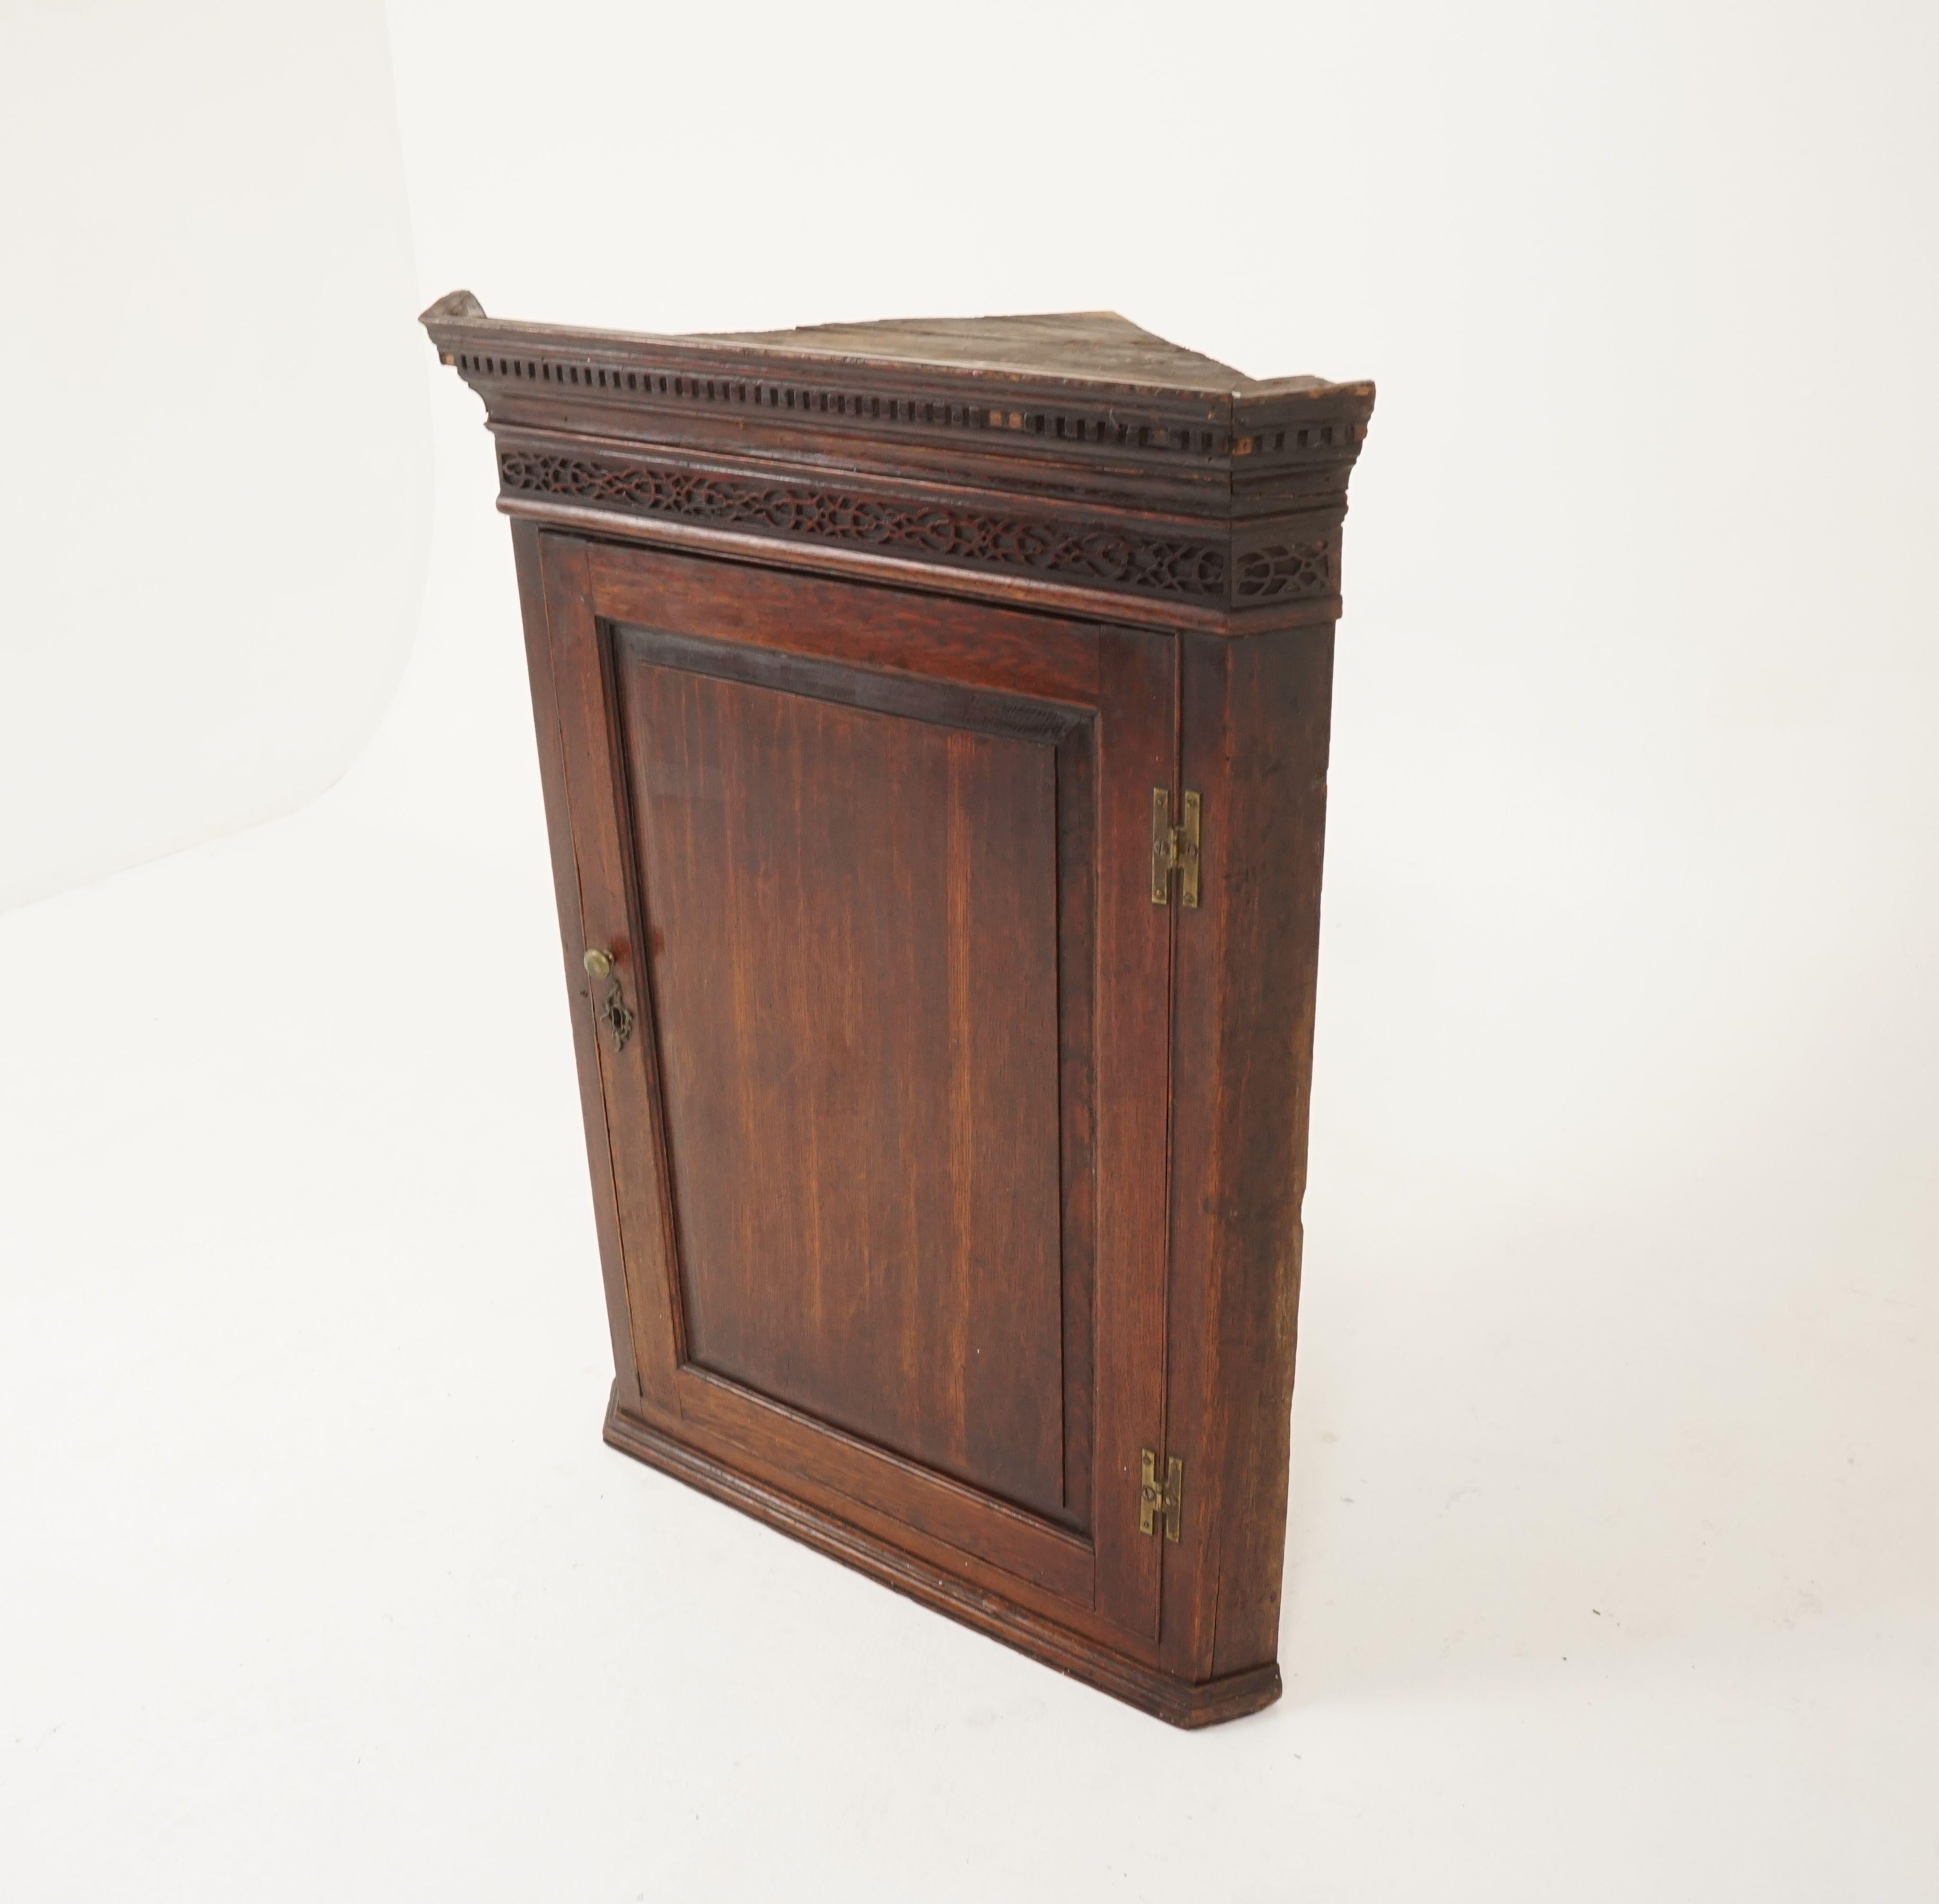 Antique oak hanging corner cabinet, Scotland 1800, H122

Scotland, 1800
Solid oak
Original finish
Moulded cornice with dentil frieze underneath
Canted side panels flank a fielded panel door
Original butterfly hinges
Interior is fitted with three